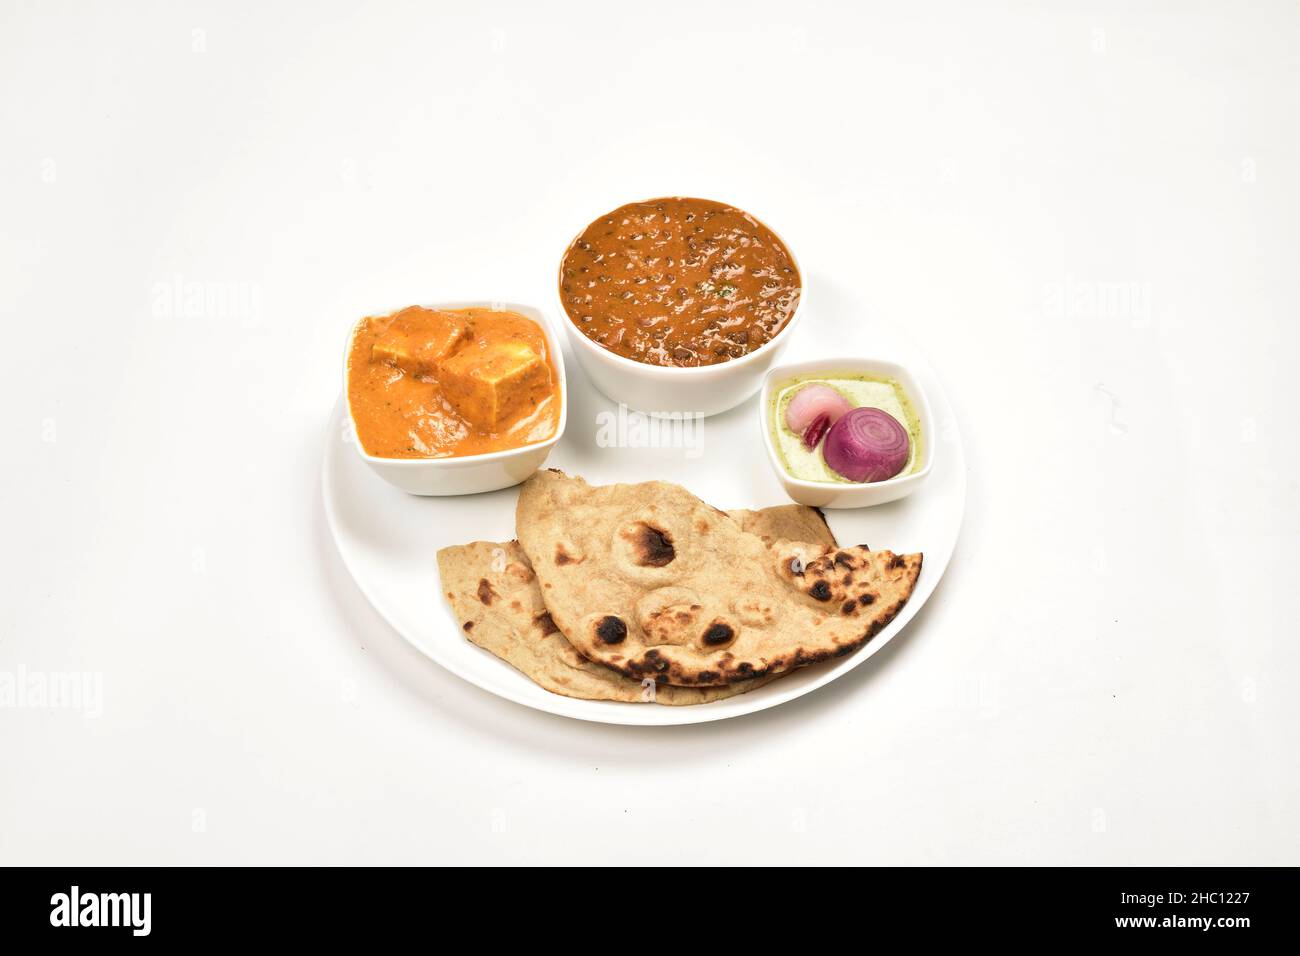 Dal Makhani and Shahi Paneer Served with Roti in Plate Isolated on White Background, Indian Main Course Stock Photo